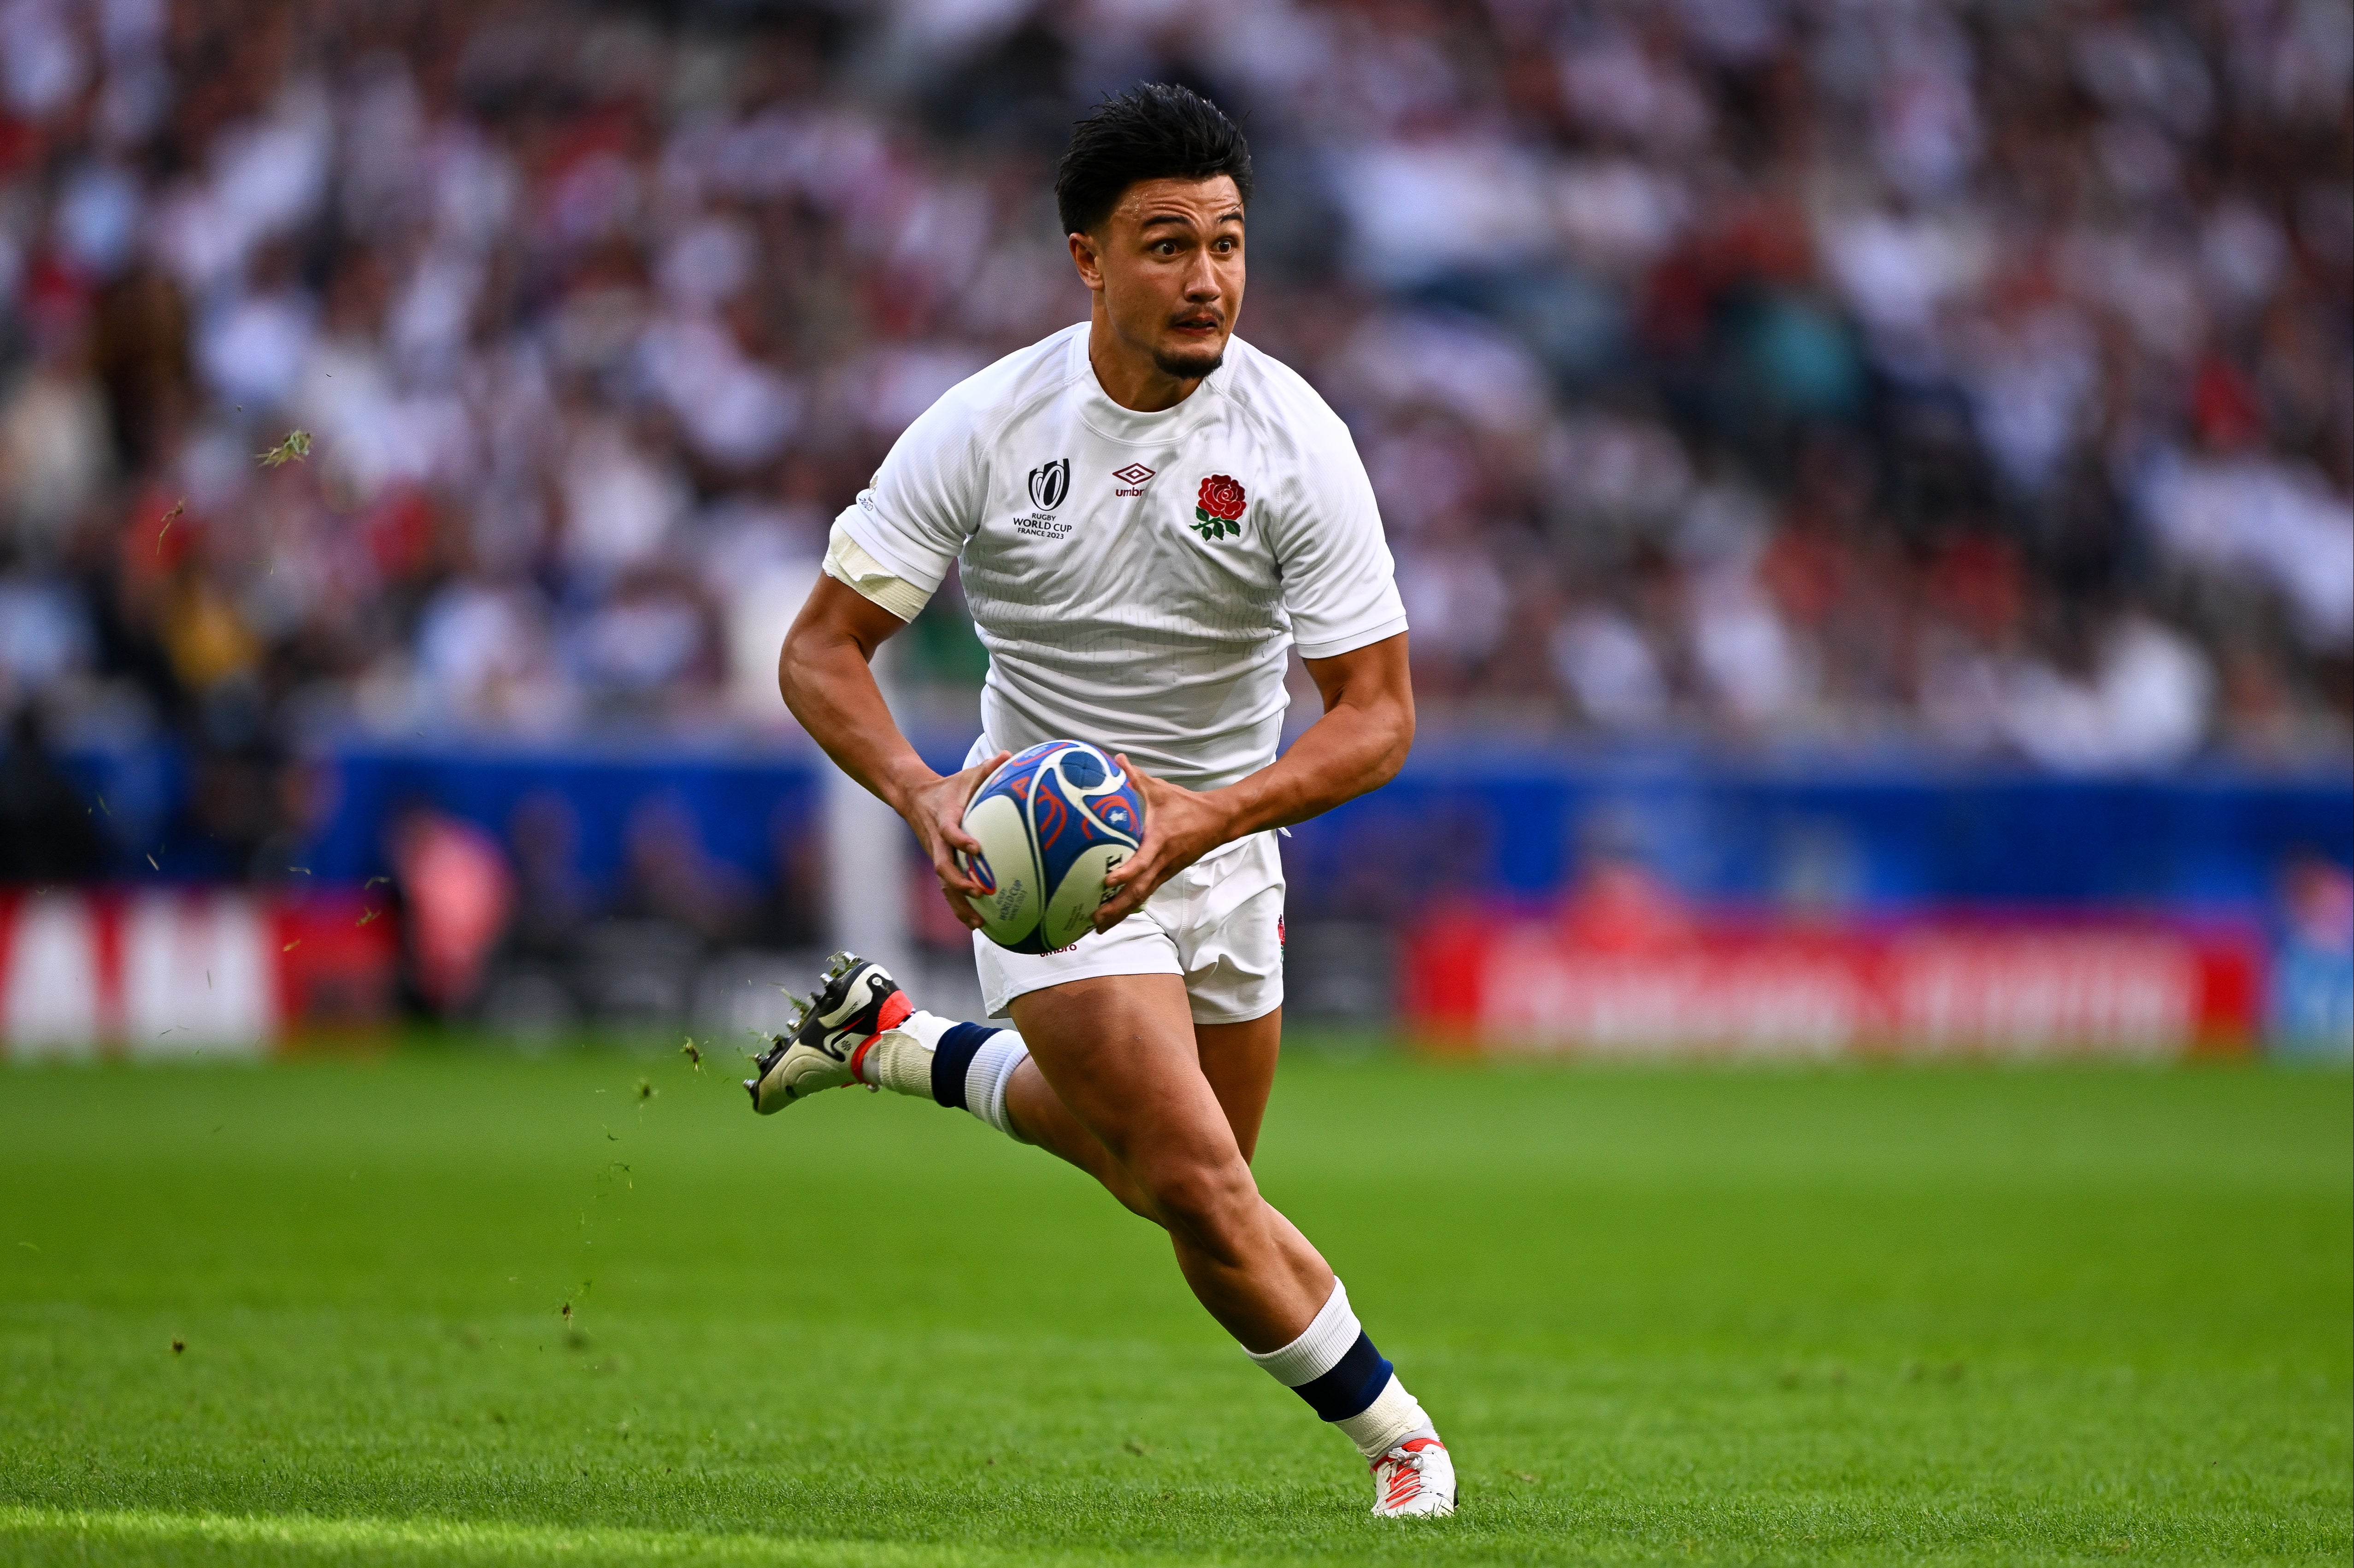 Marcus Smith will start at full-back for England’s quarter-final against Fiji